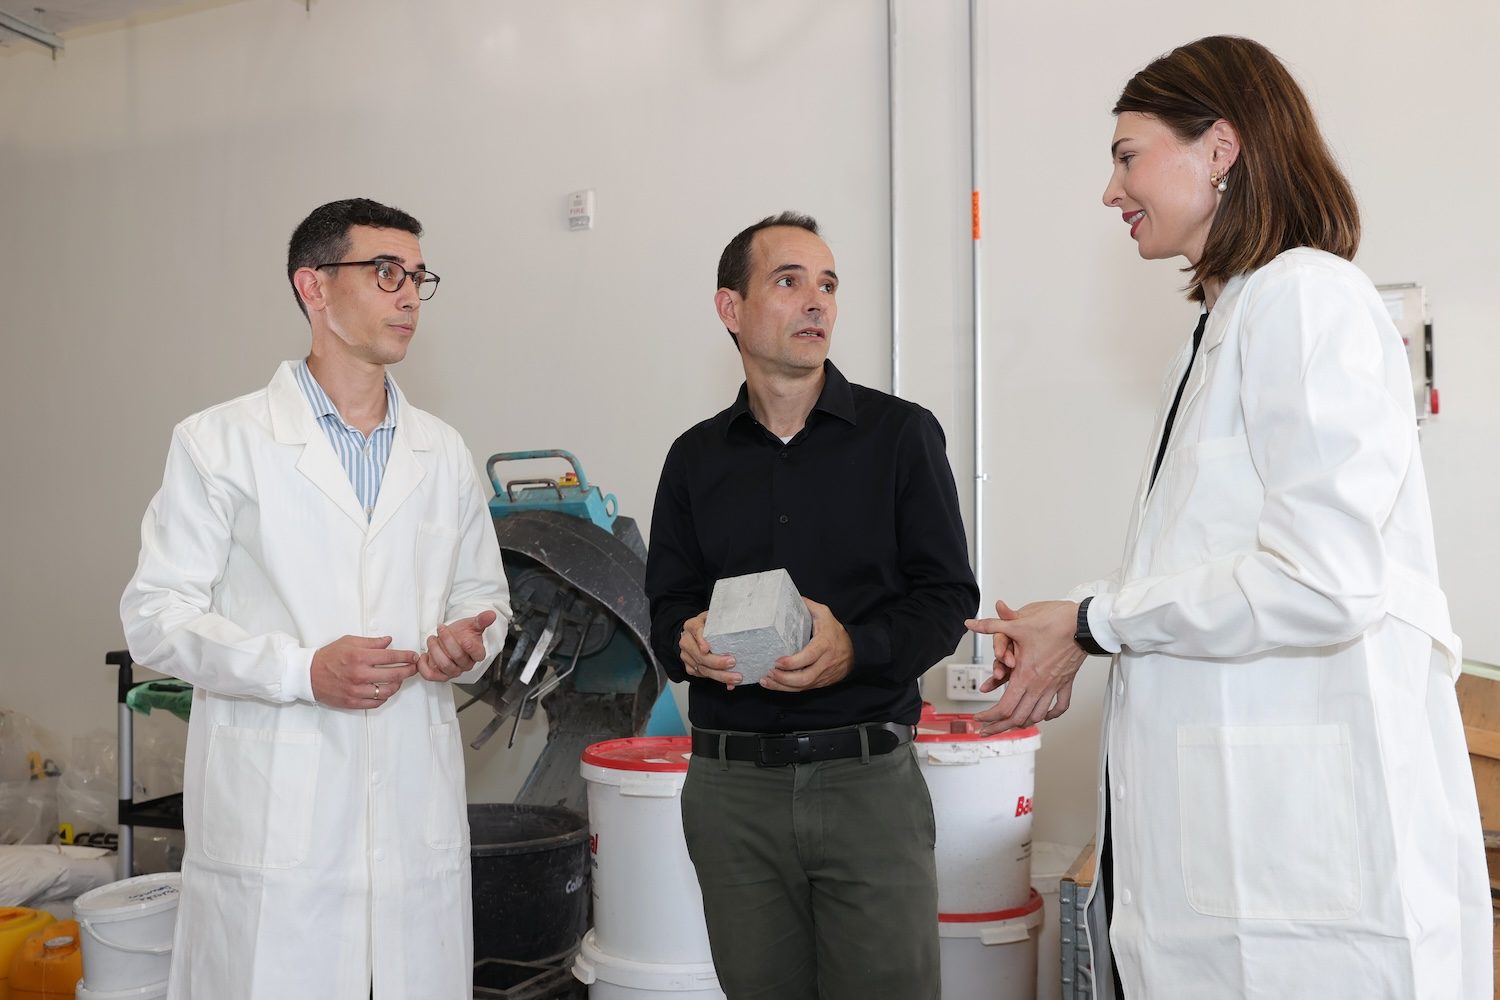 Jorge Gascon (centre) with the co-founder of ClimateCrete Juan Manuel Colom (left) and Anastasiya Bavykina, research scientist at Kaust’s Catalysis Centre